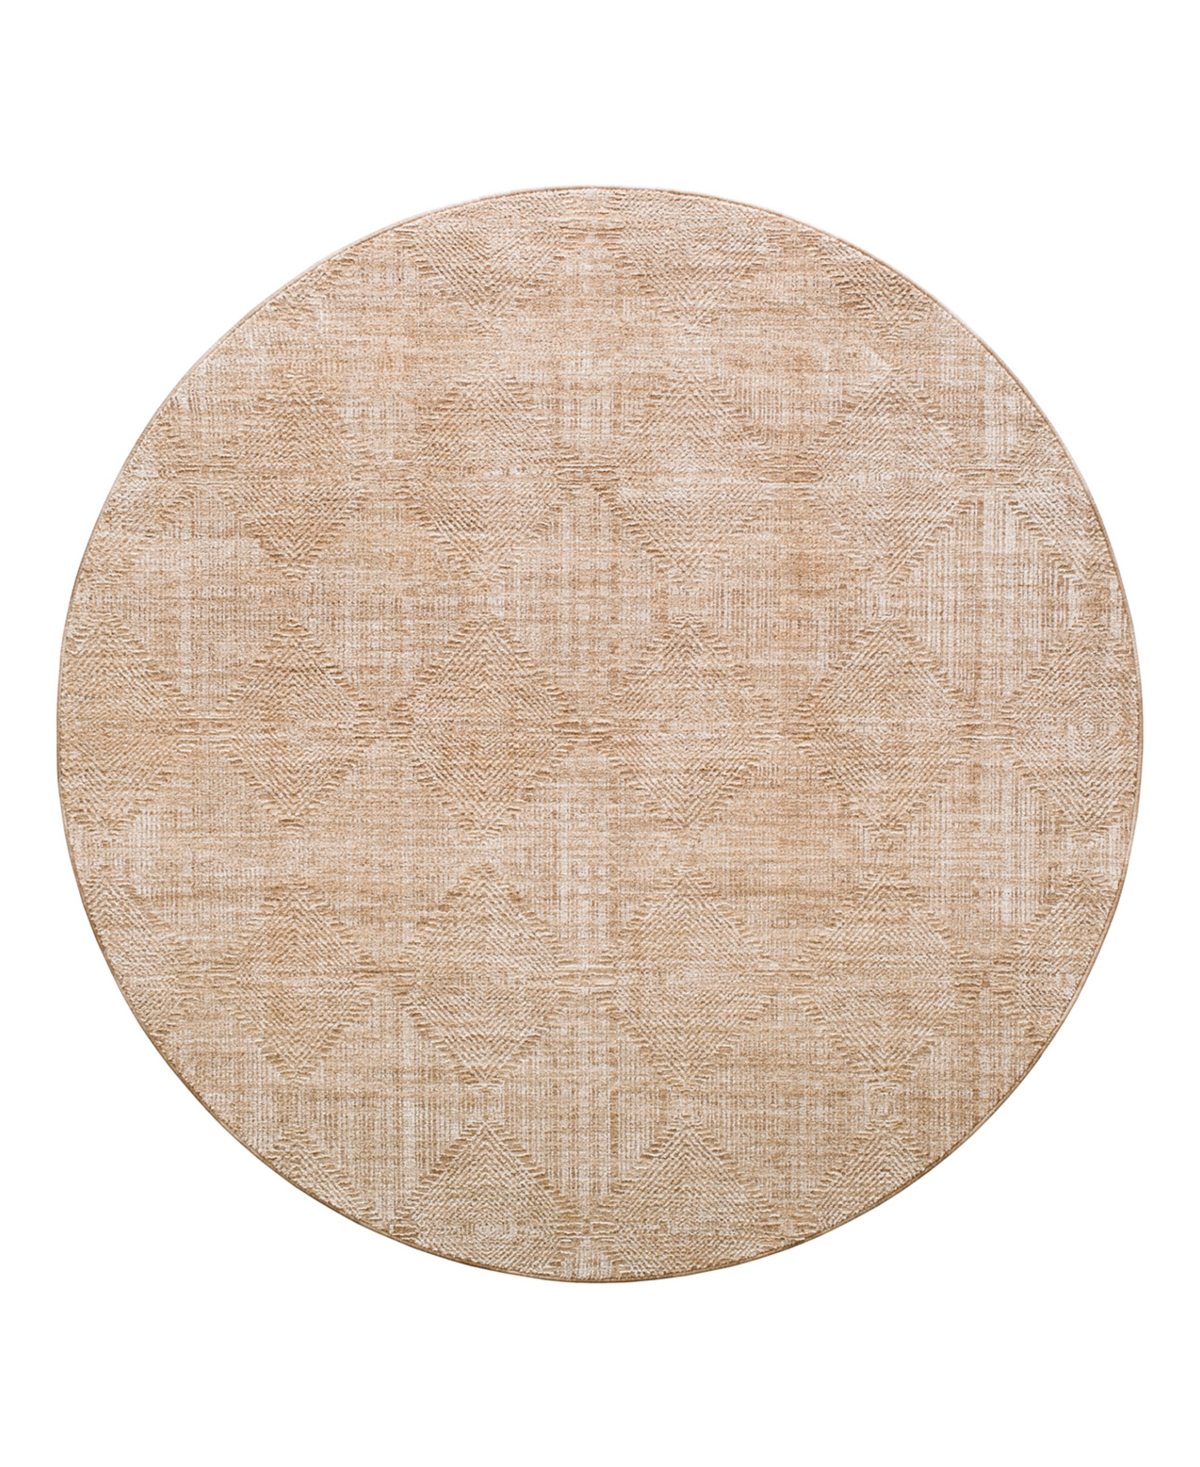 Surya Masterpiece High-Low Mpc-2312 7'10in x 7'10in Round Area Rug - Tan